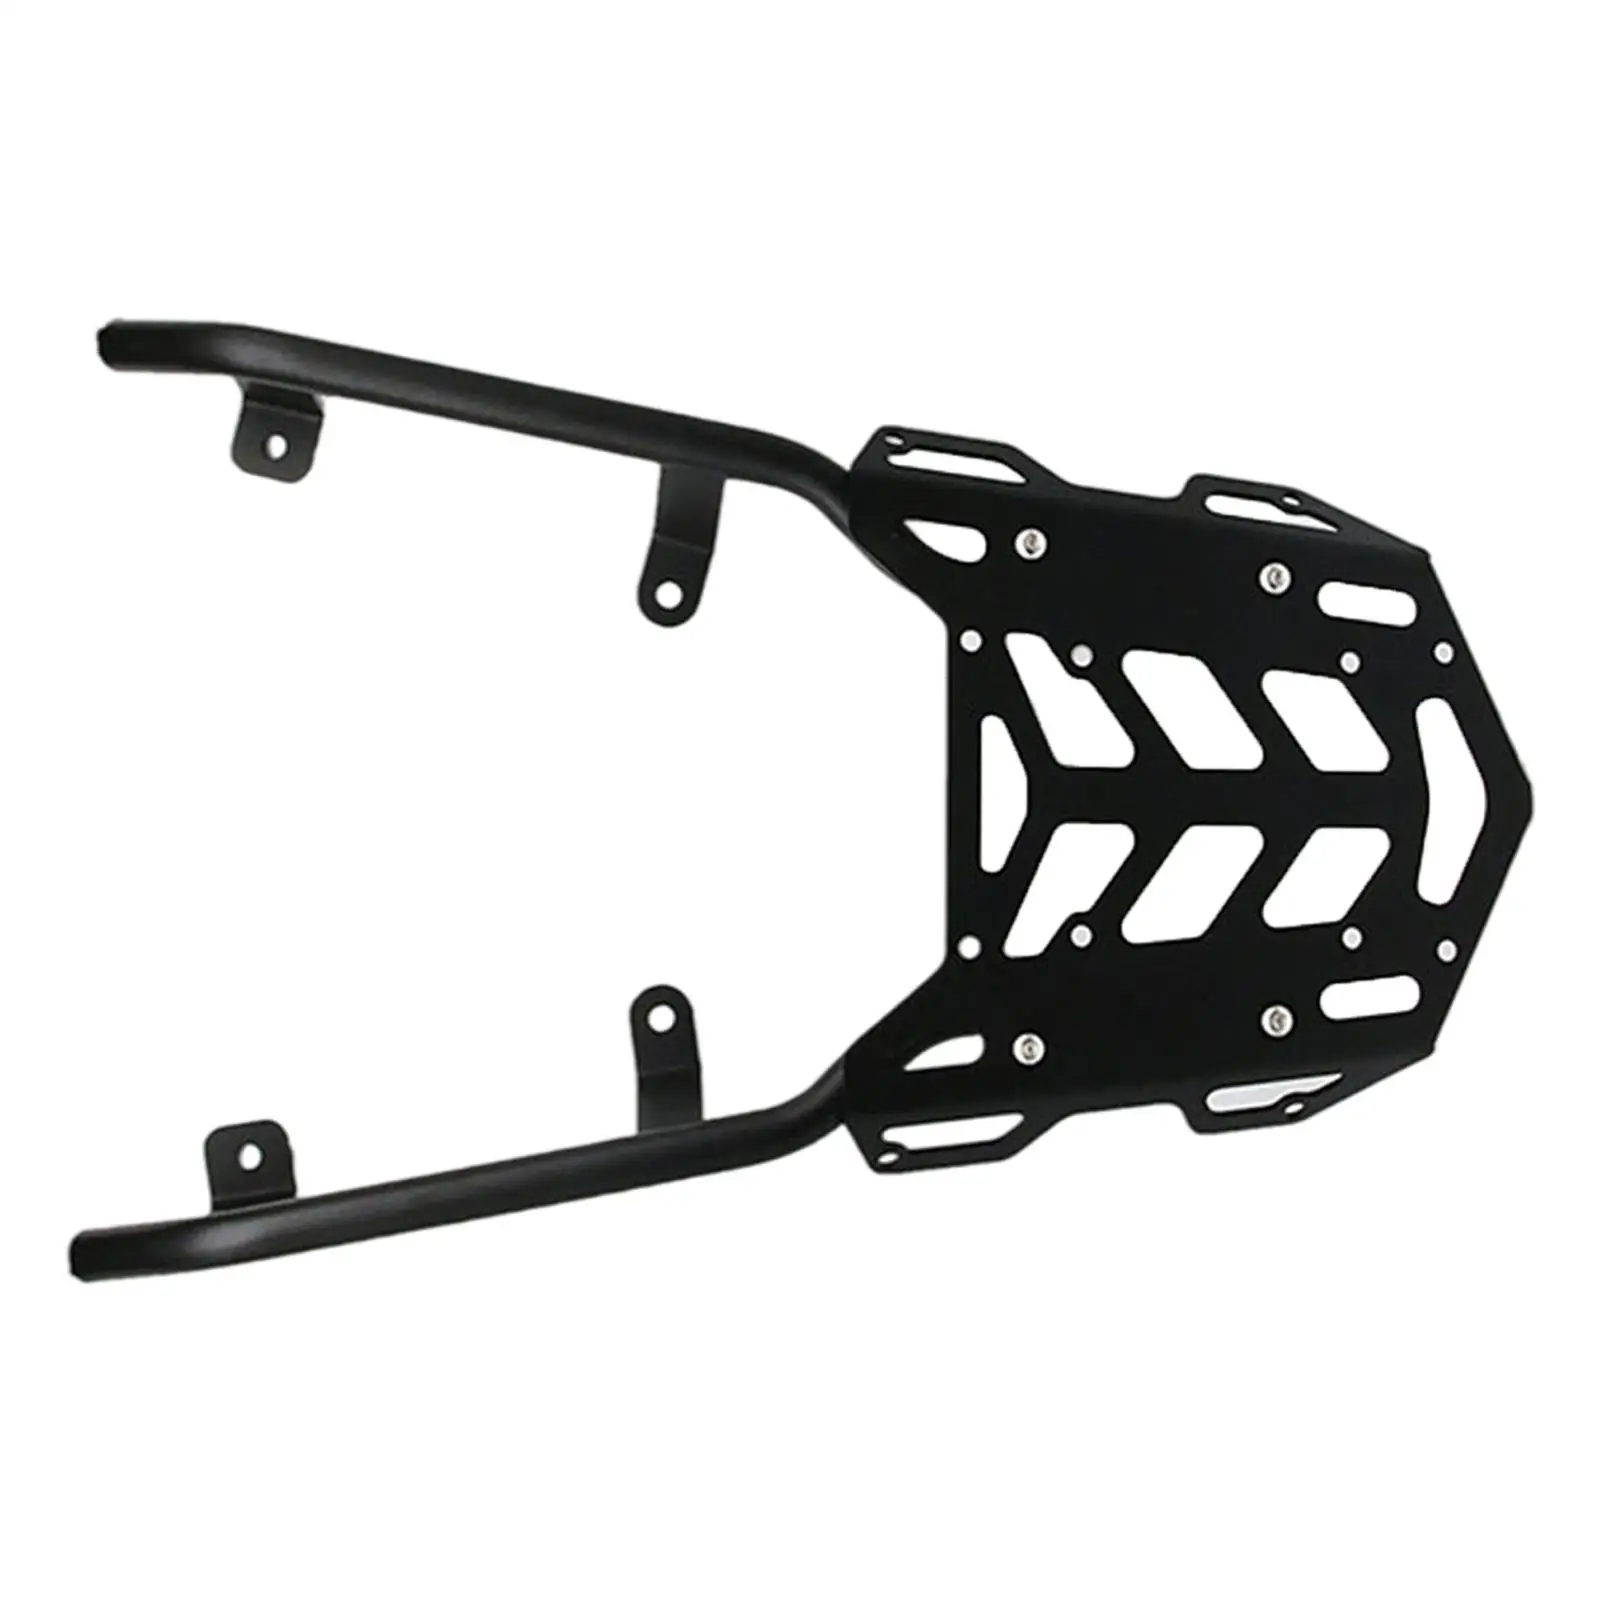 Motorcycle Rear Luggage Rack Fit for 19-21 Easy Install Parts